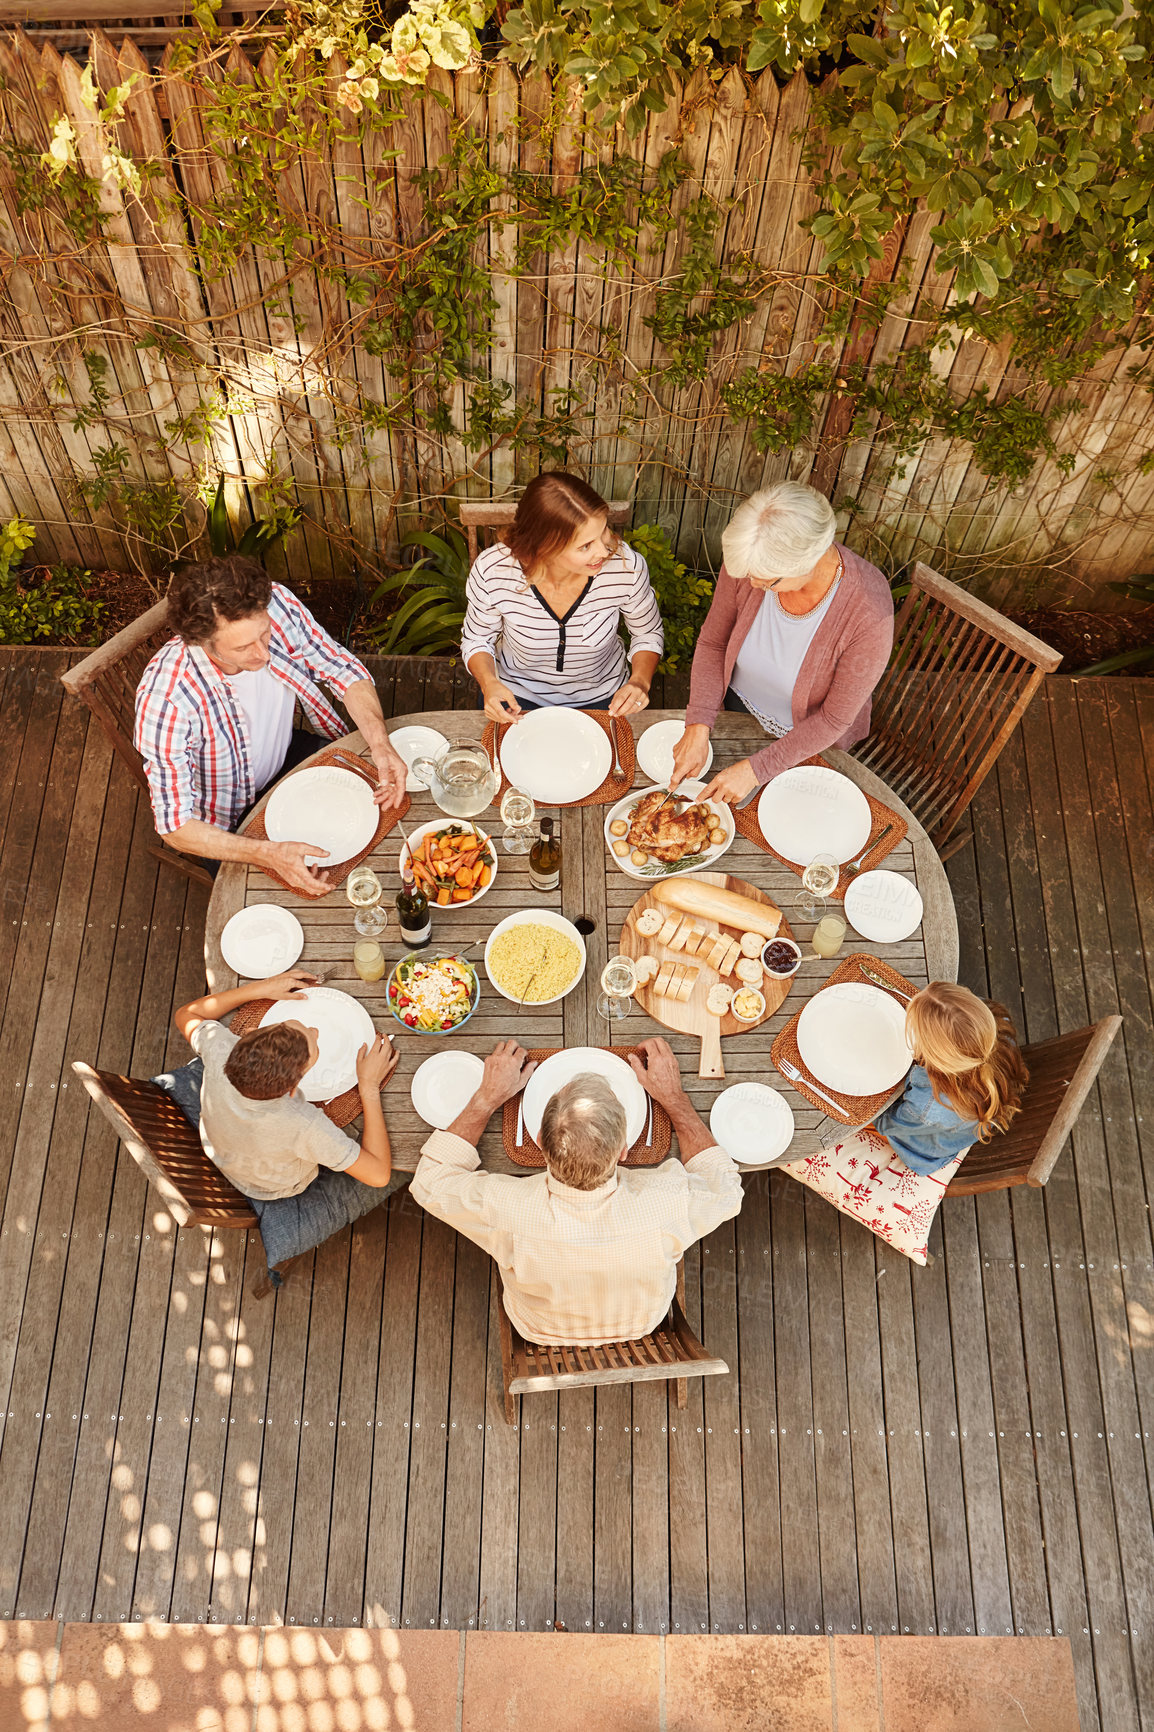 Buy stock photo High angle shot of a family eating lunch outdoors